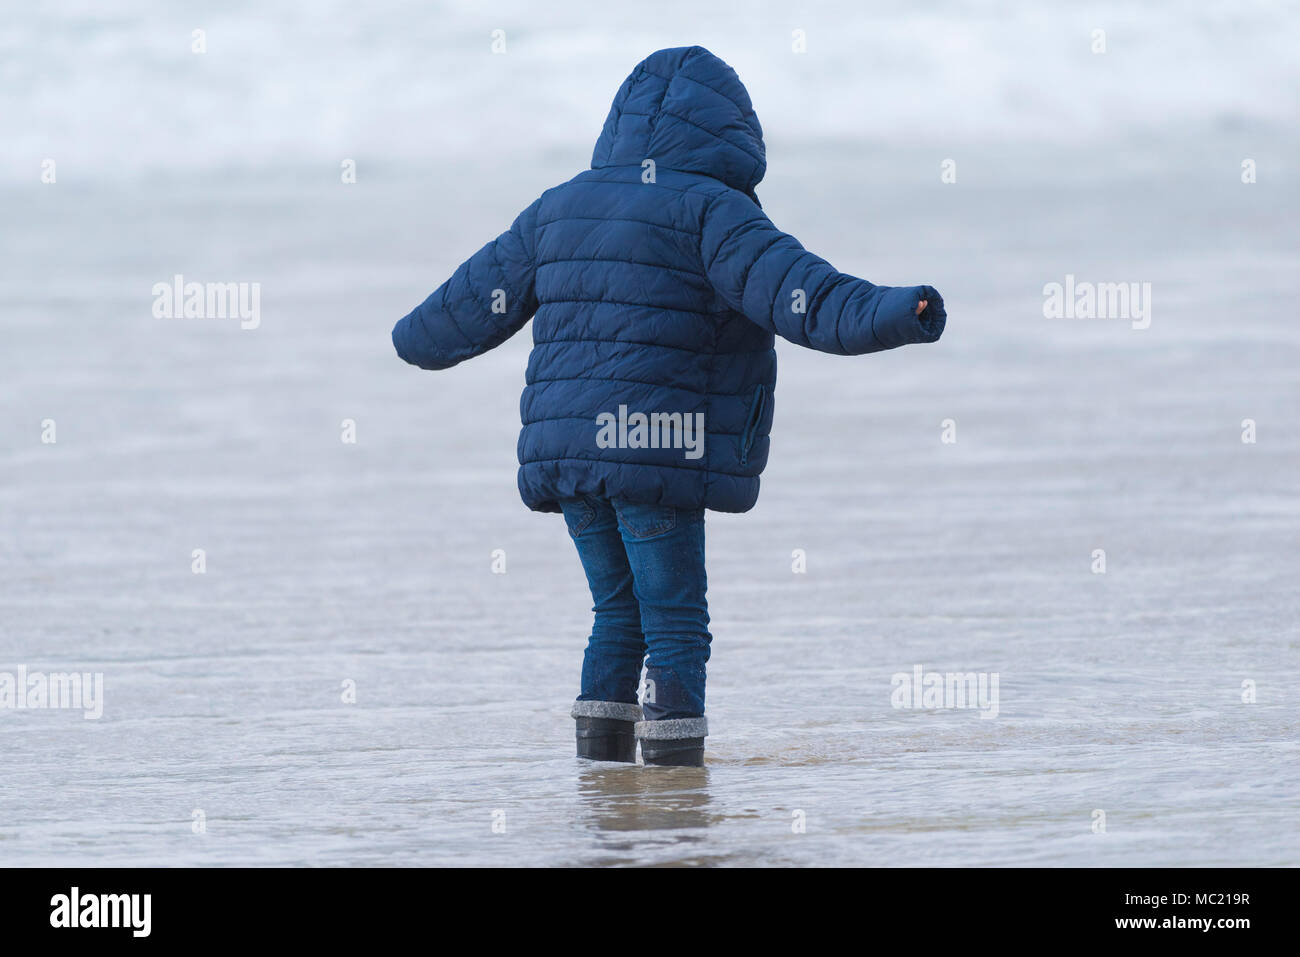 A young boy wearing a hooded jacket standing in the sea. Stock Photo